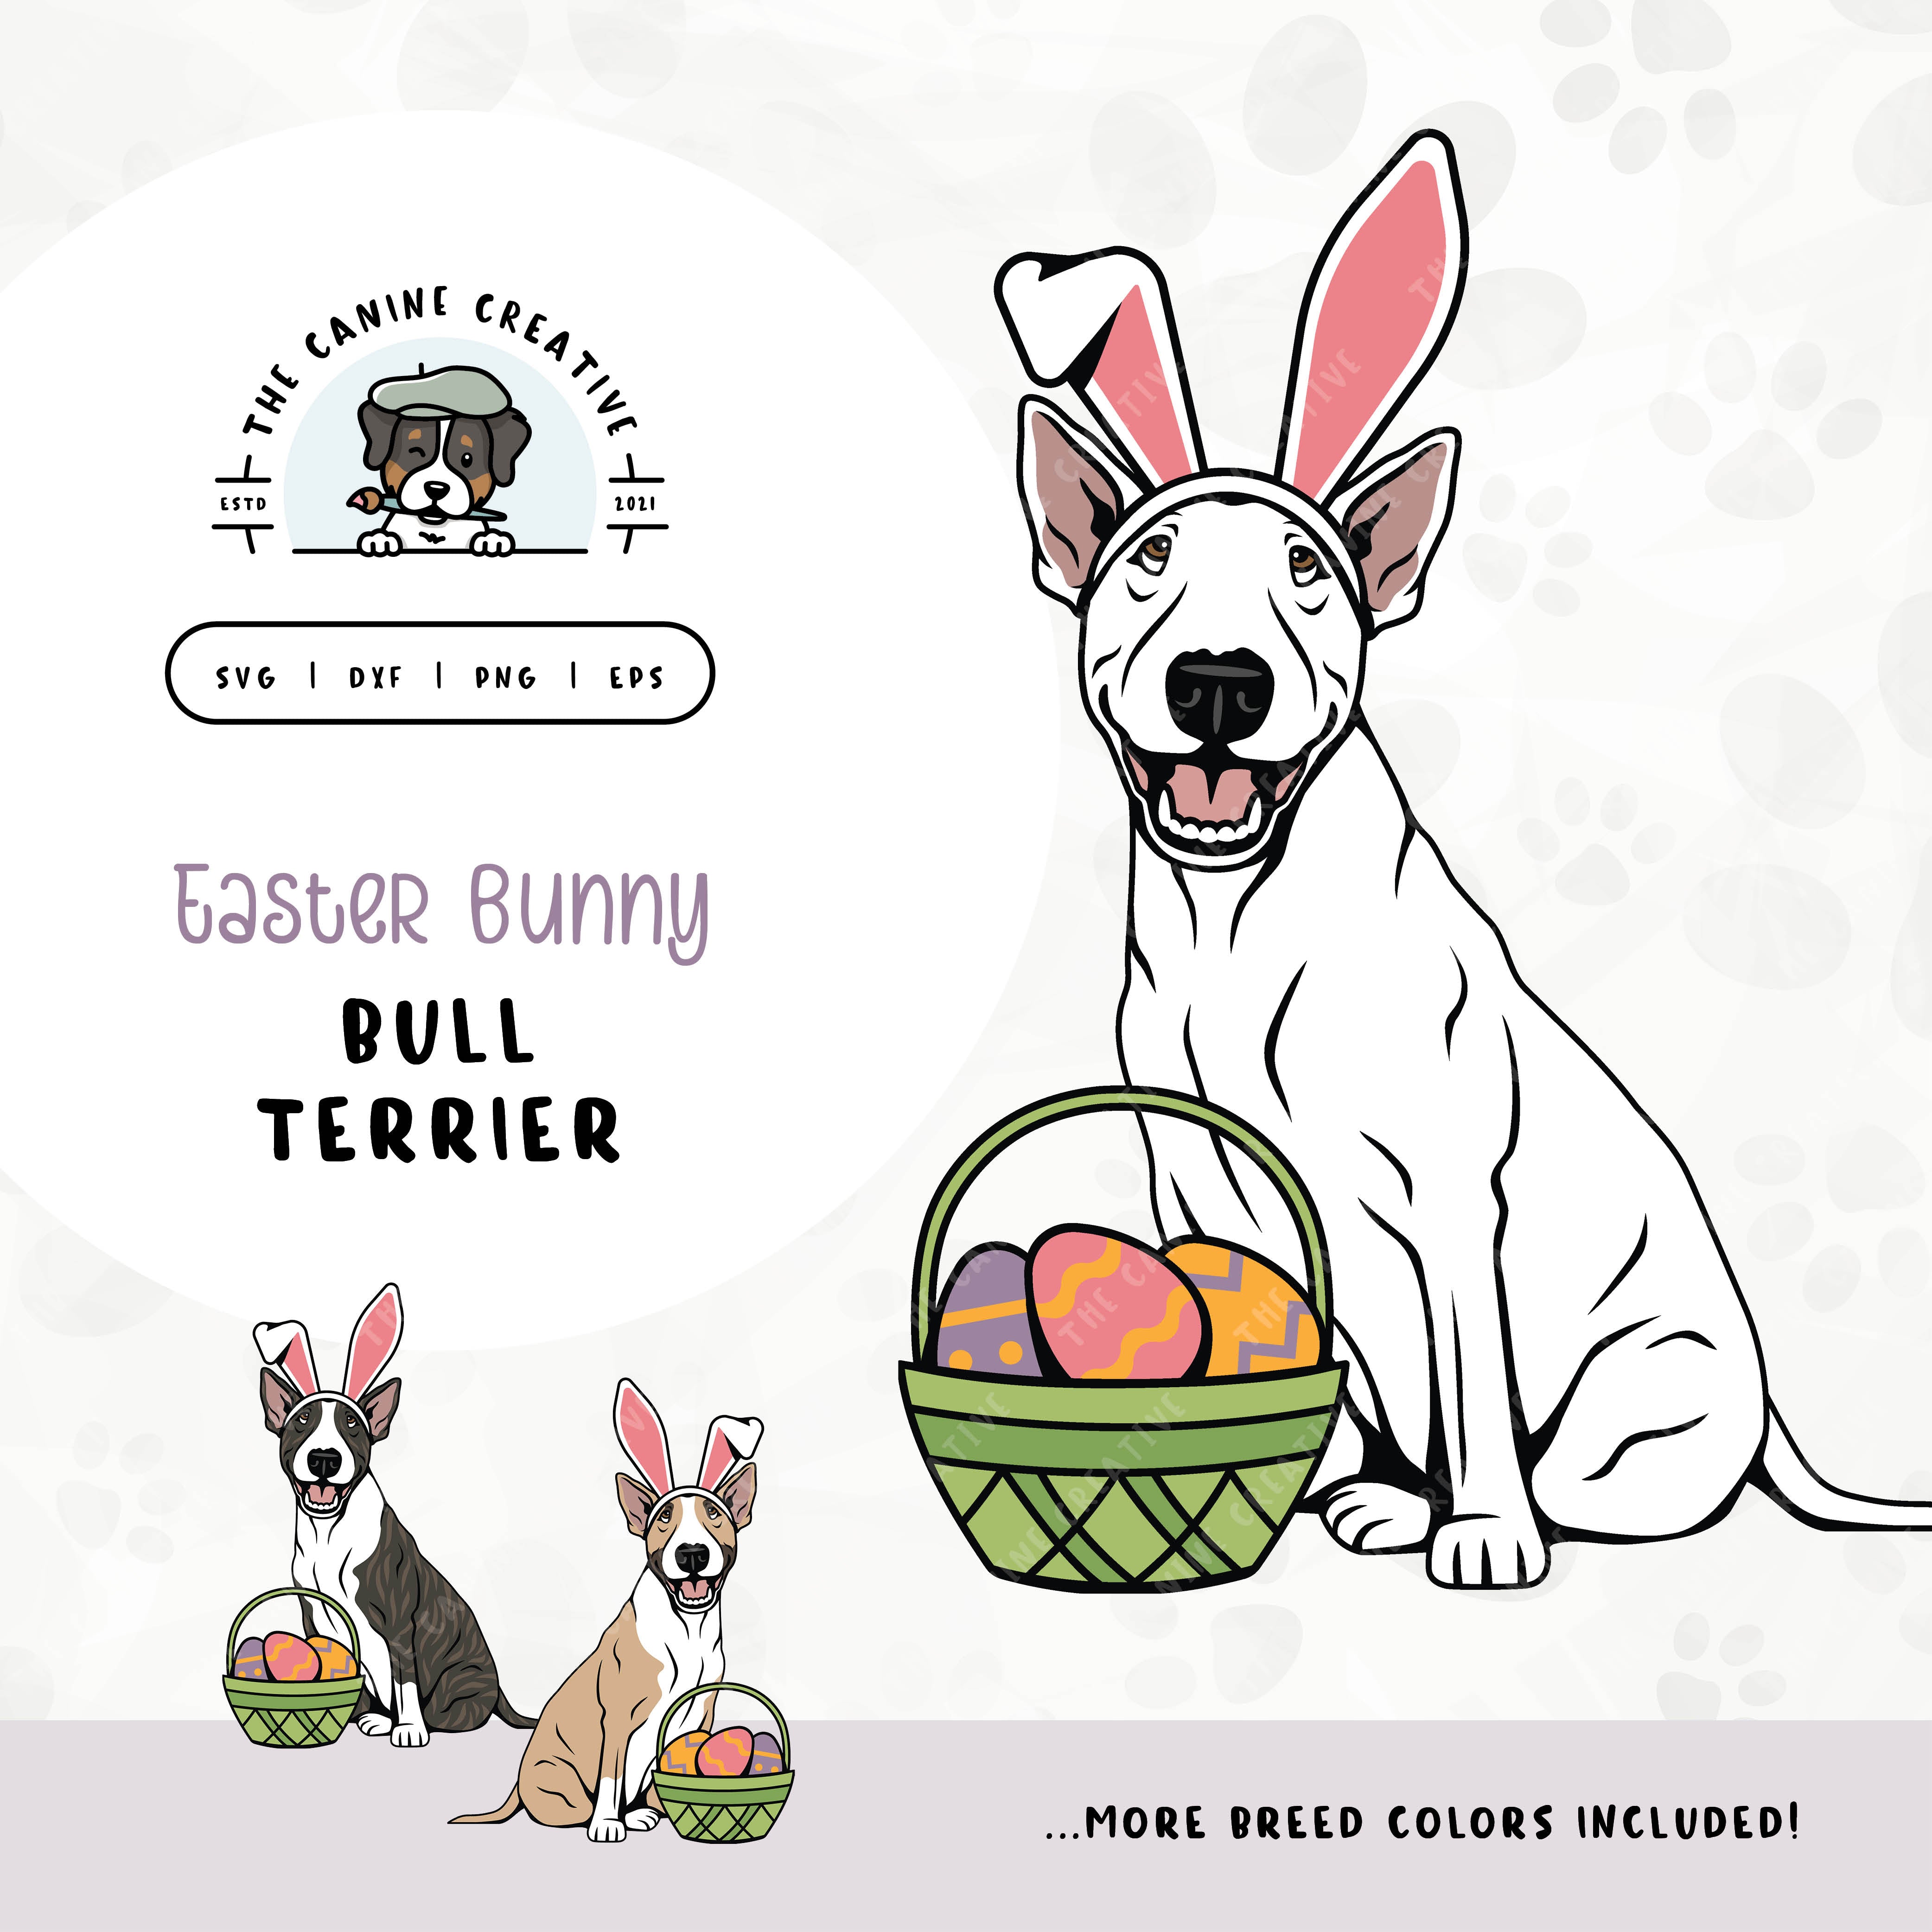 This springtime illustration features a Bull Terrier adorned with festive bunny ears sitting next to a basket of brightly-colored Easter eggs. File formats include: SVG, DXF, PNG, and EPS.